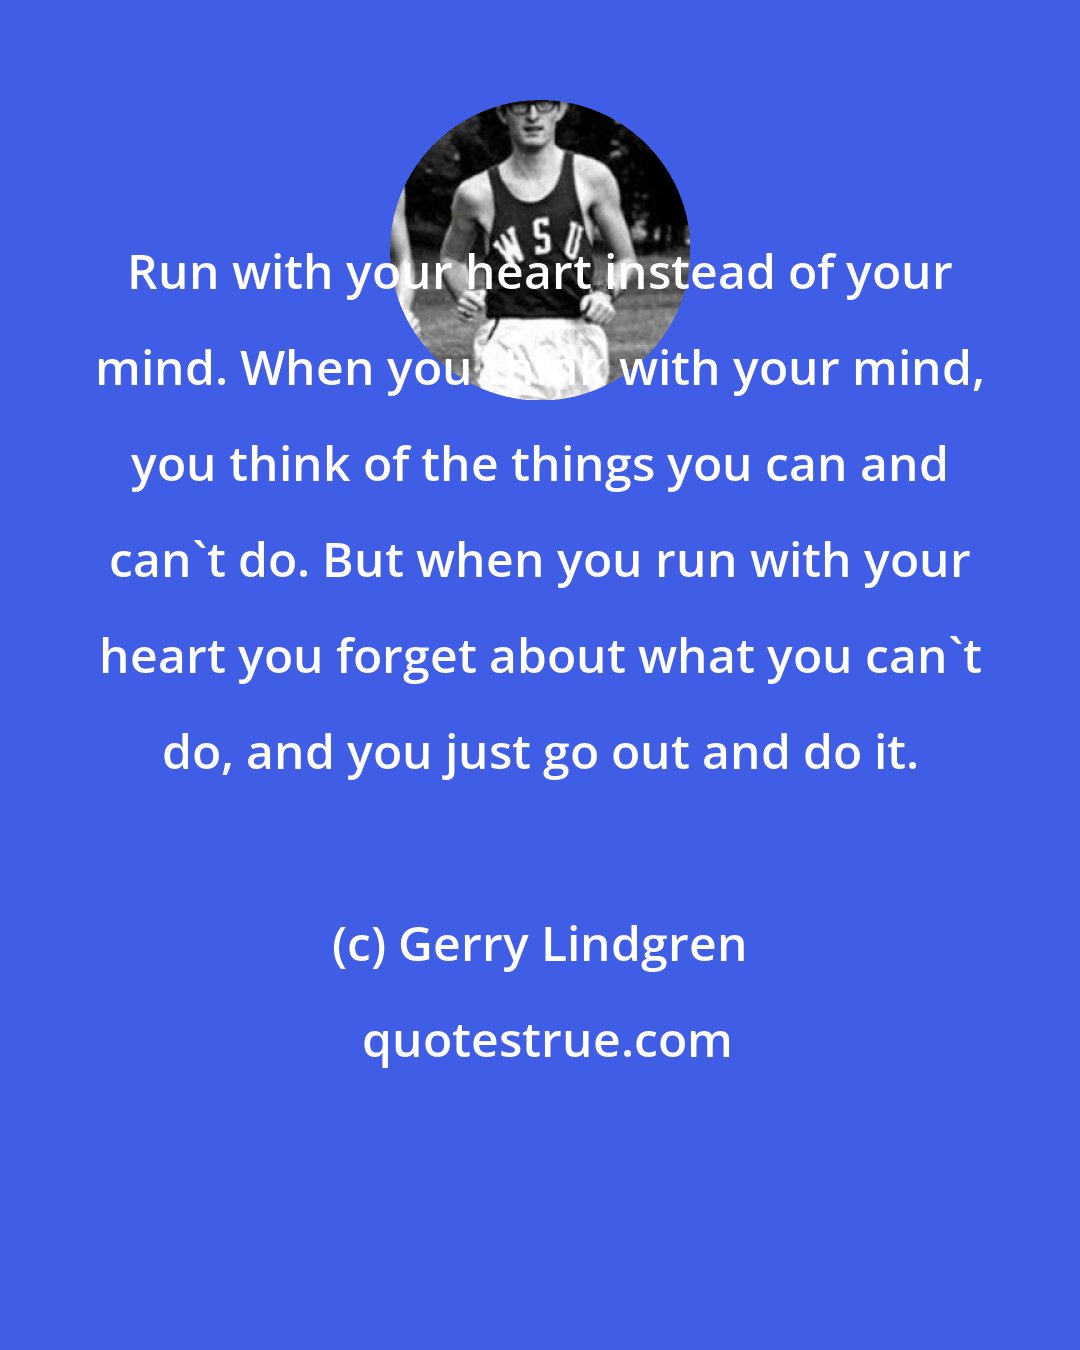 Gerry Lindgren: Run with your heart instead of your mind. When you think with your mind, you think of the things you can and can't do. But when you run with your heart you forget about what you can't do, and you just go out and do it.